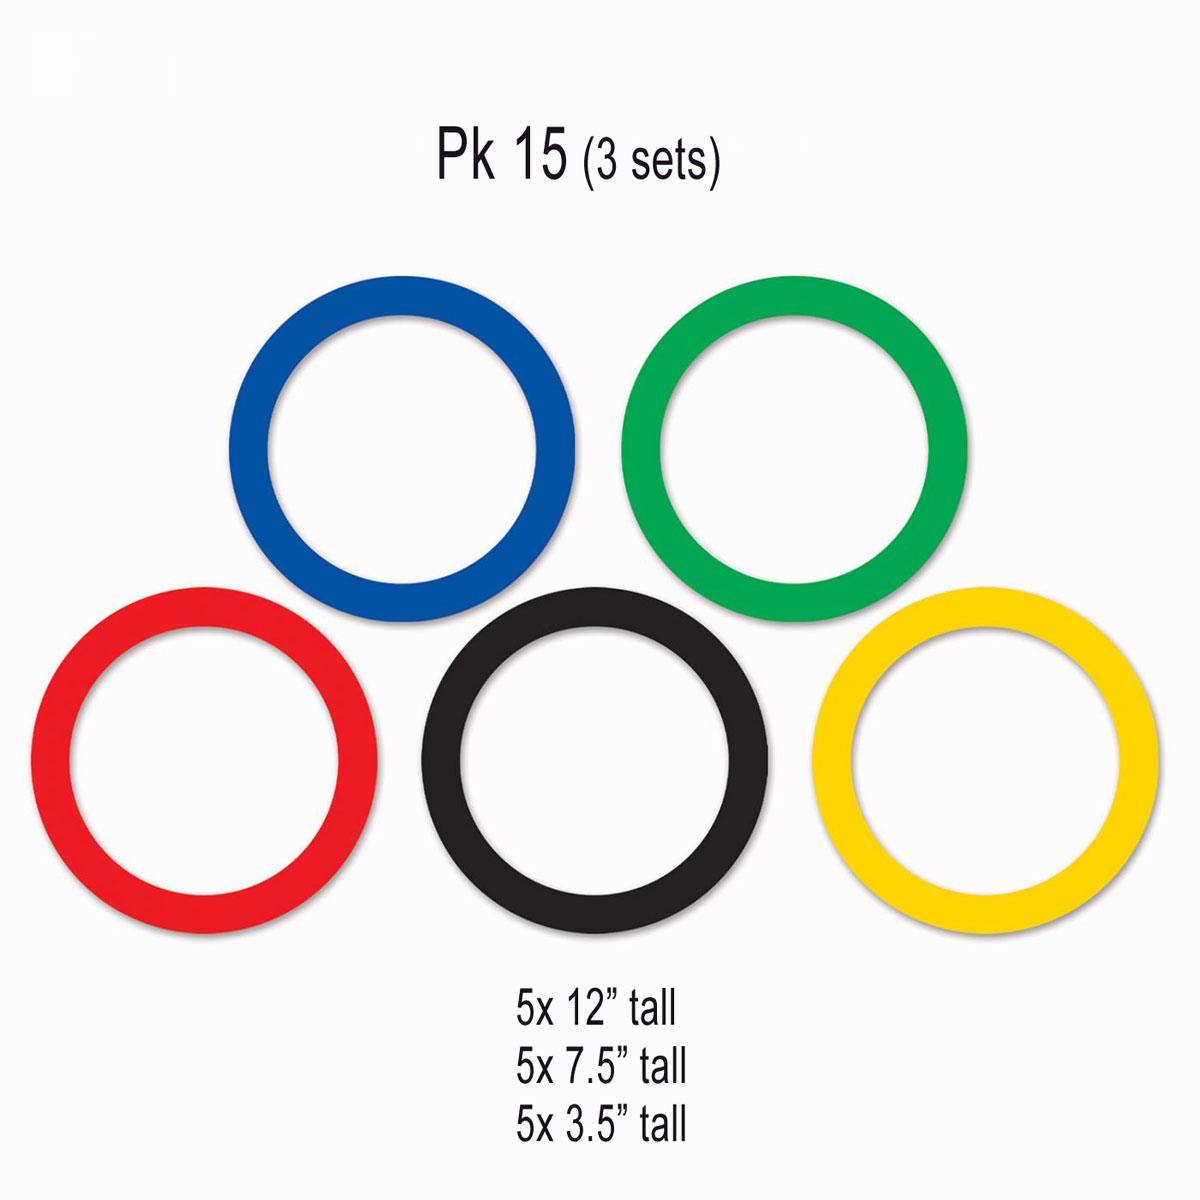 3 sets of Olympic Rings cutouts; sizes 12", 7.5" and 3.5" 15 pcs total available here at Karnival Costumes online party shop